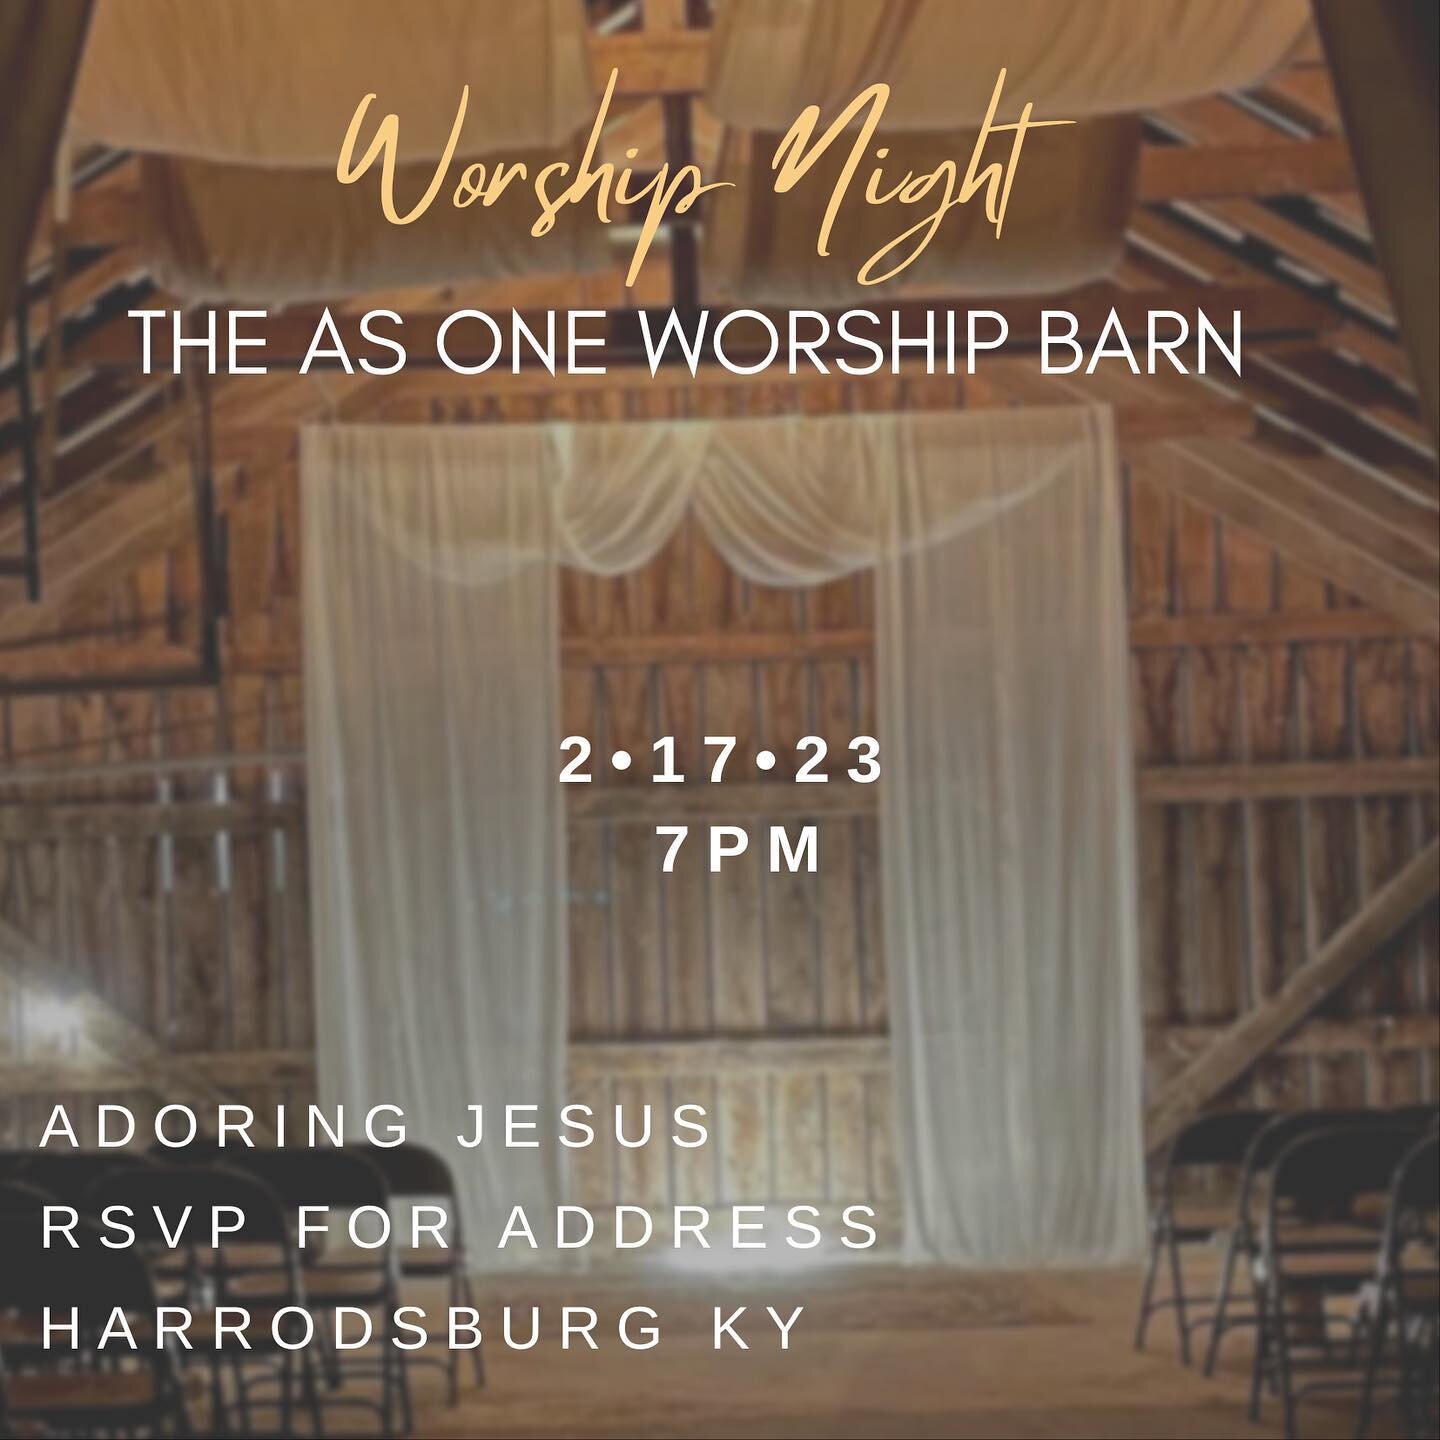 Join us this Friday as we simply adore and agree with Jesus. 
Fellowship and prayer ministry to follow in the cabin 
Everyone is welcome . RSVP👇🏻
#harrodsburgky #kentucky #worshipnightinamerica